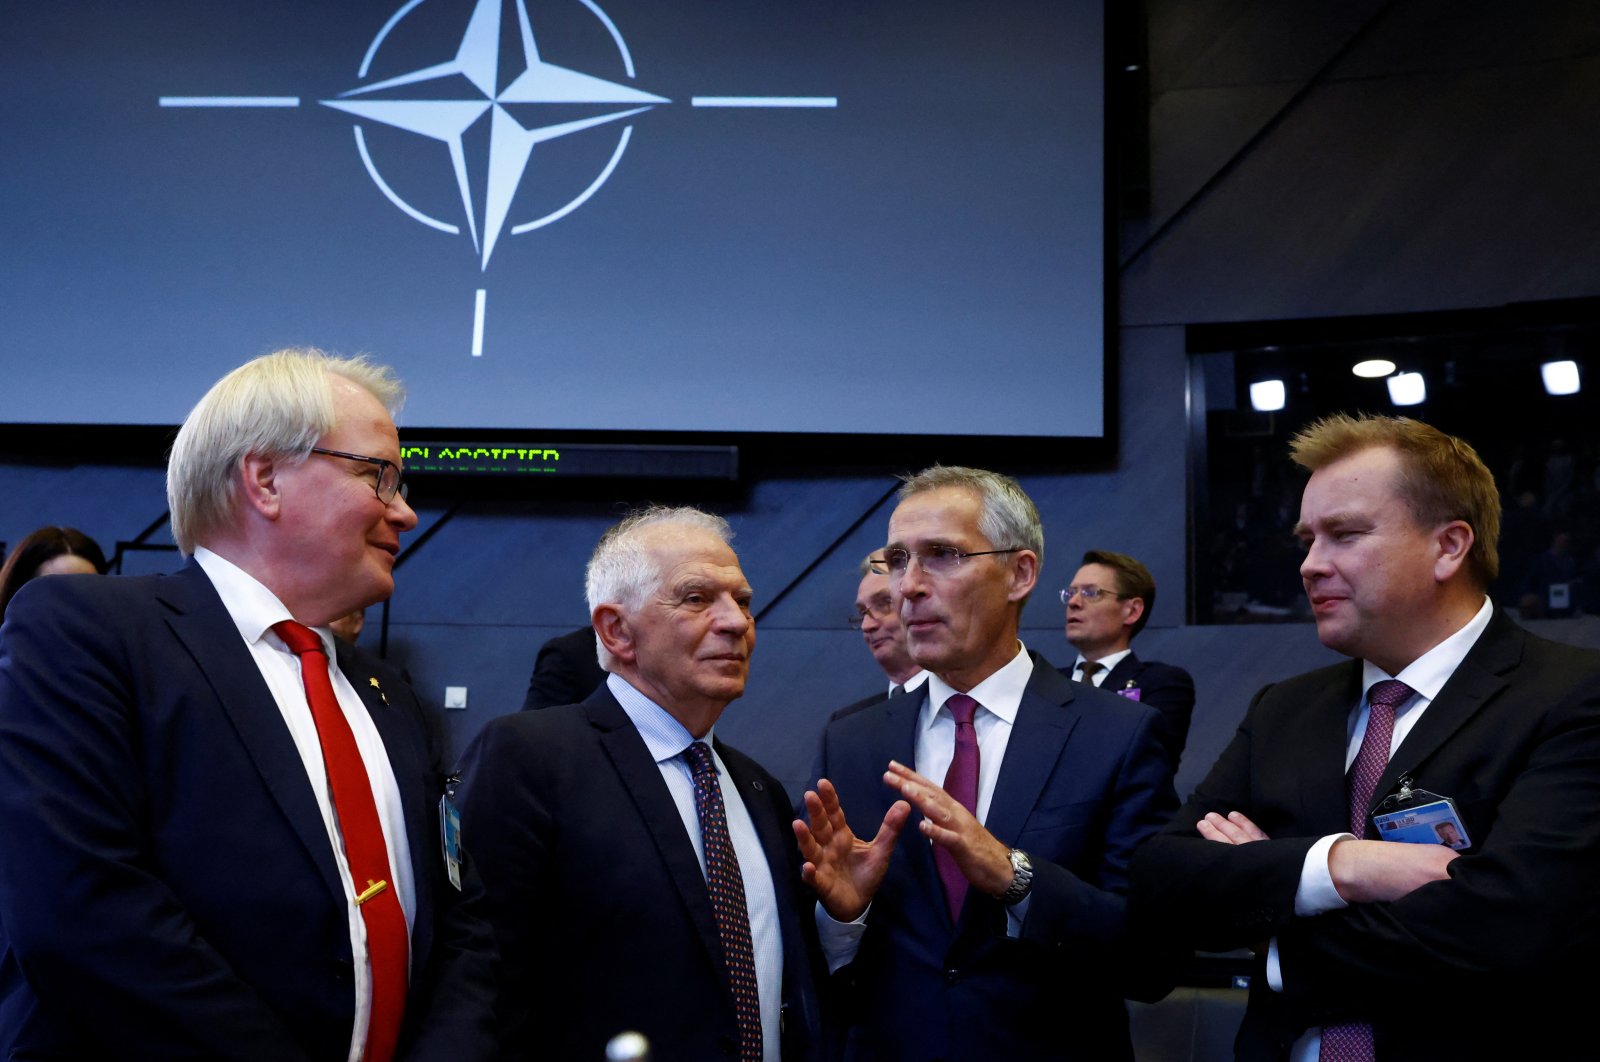 (From left to right) Sweden&#039;s Defense Minister Peter Hultqvist, European Union foreign policy chief Josep Borrell, NATO Secretary-General Jens Stoltenberg and Finland&#039;s Defense Minister Antti Kaikkonen meet during a NATO defense ministers meeting, with Finland and Sweden as invitees, at the alliance&#039;s headquarters in Brussels, Belgium, Oct. 13, 2022. (Reuters Photo)